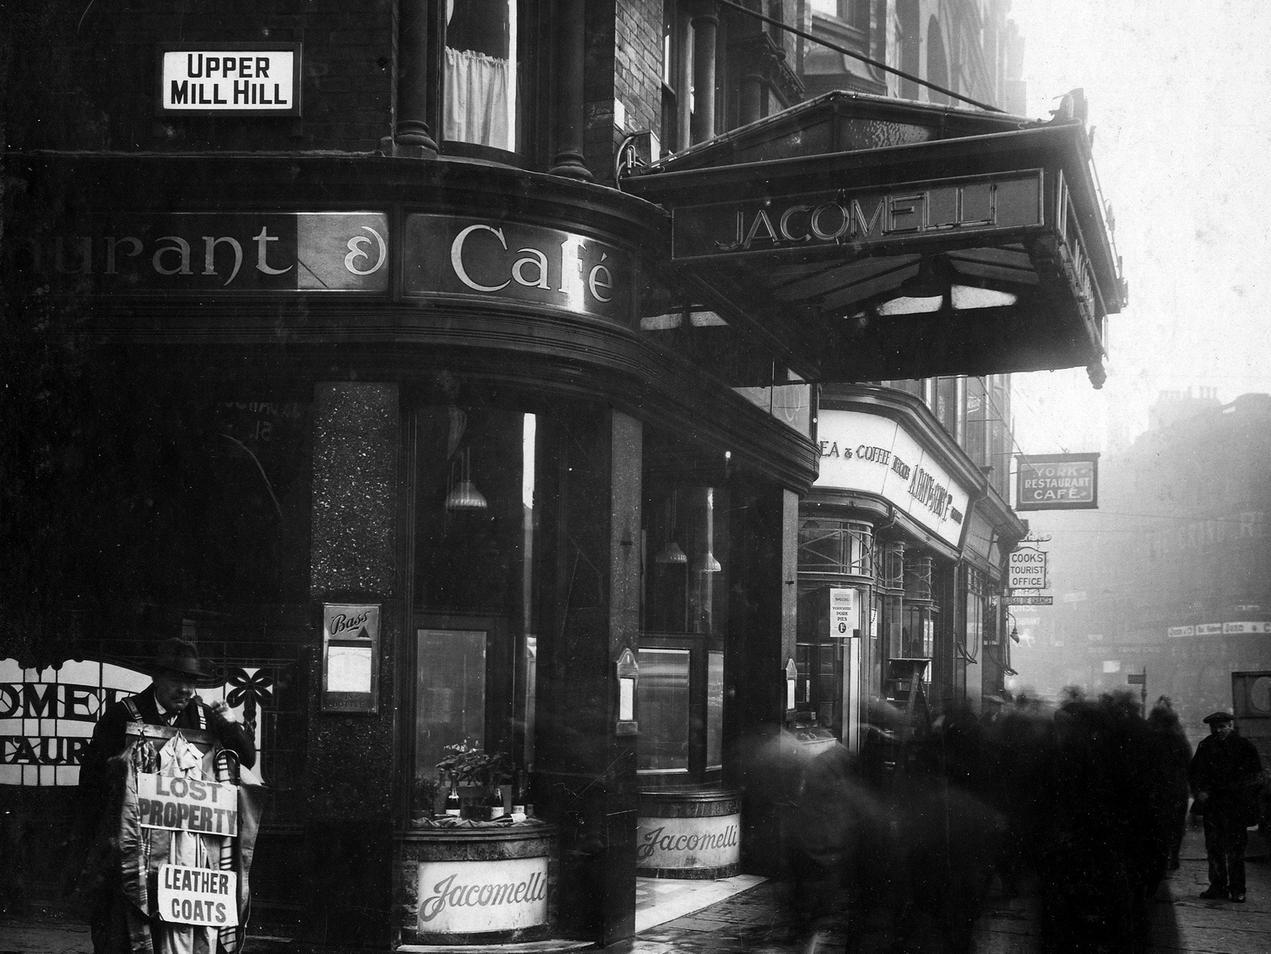 The corner of Boar Lane and Upper Mill Hill, showing Jacomelli's cafe in main view. To left of photo is a lost property man carrying leather coats.